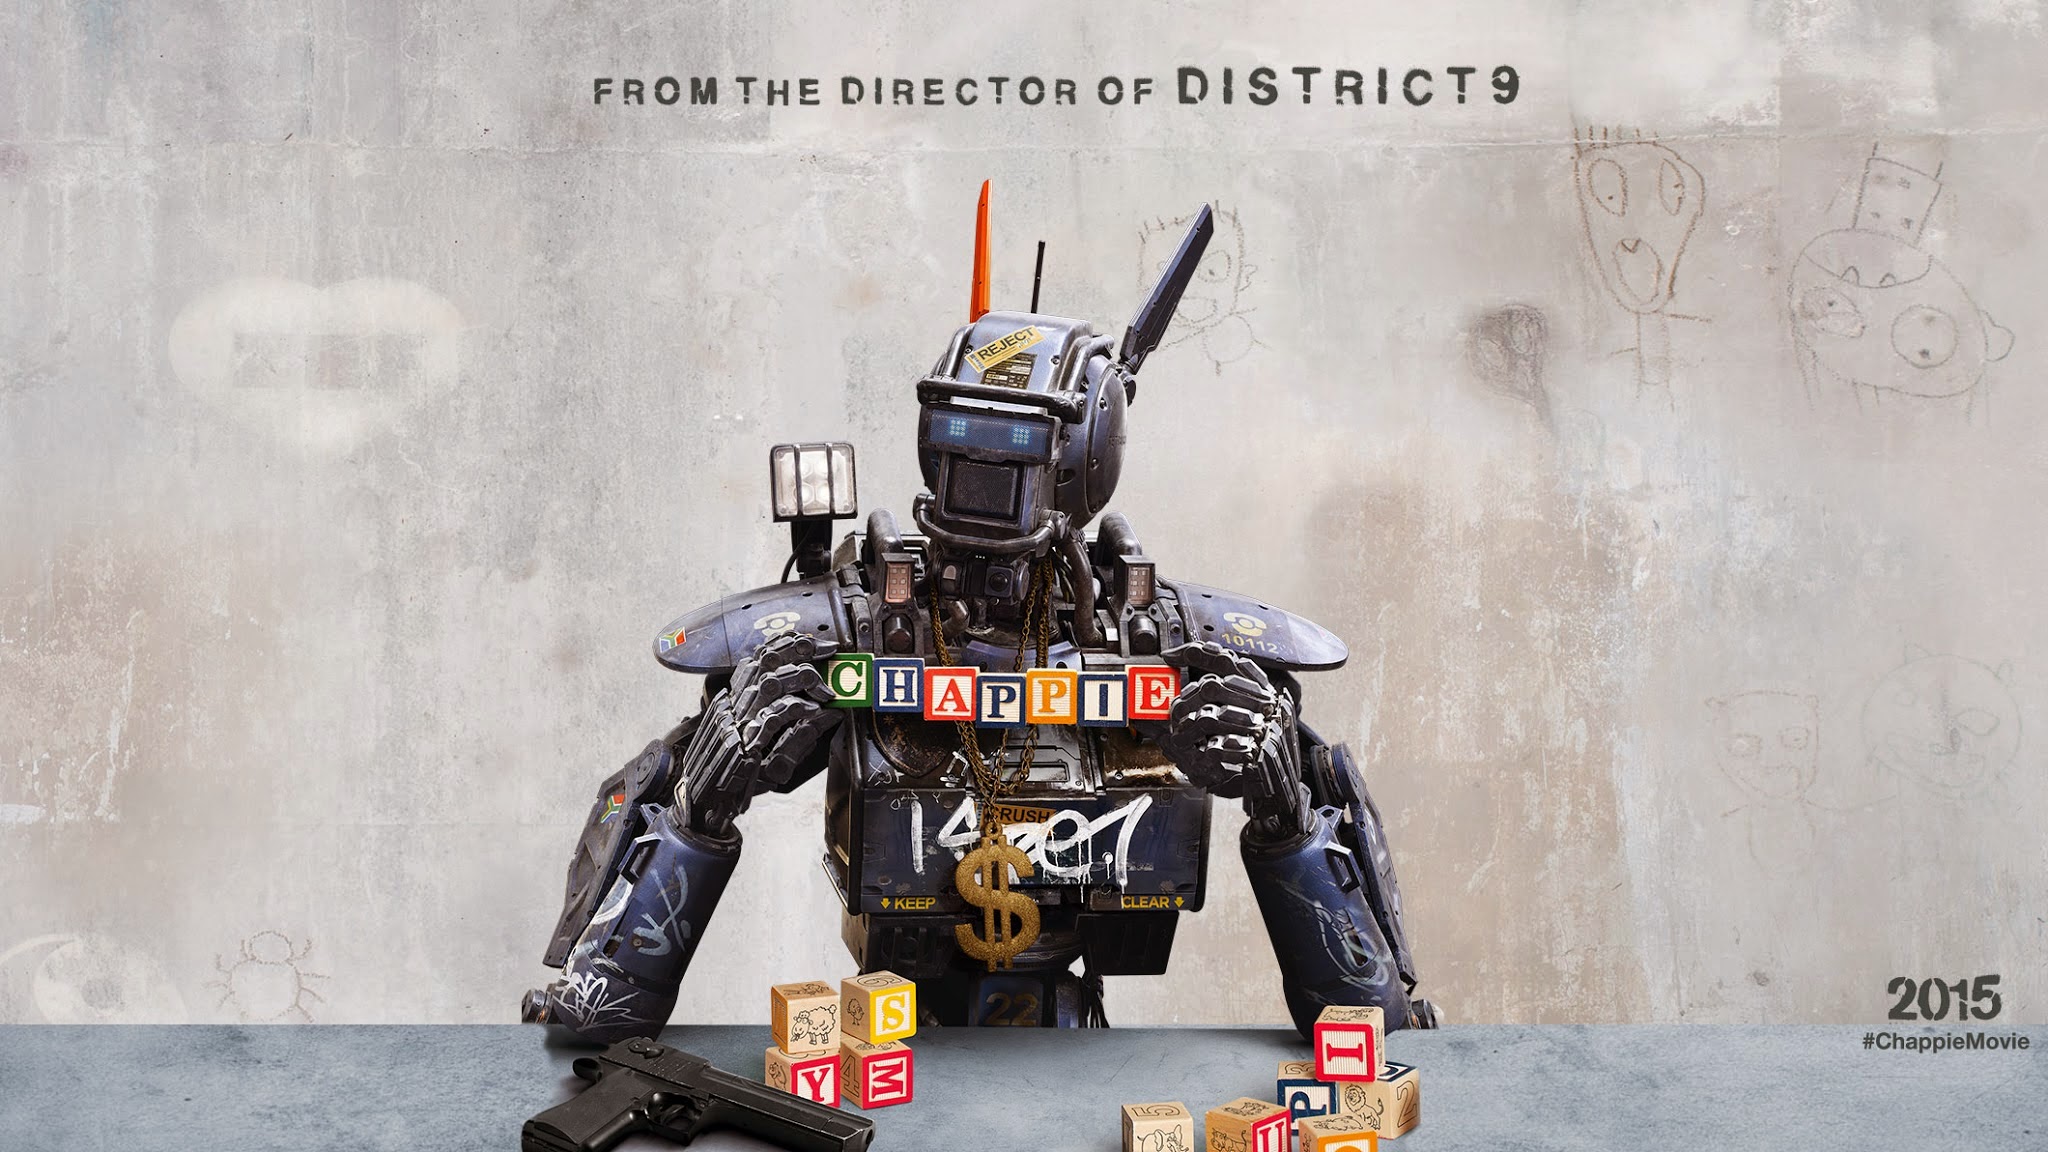 DAF_CHAPPiE_POSTER